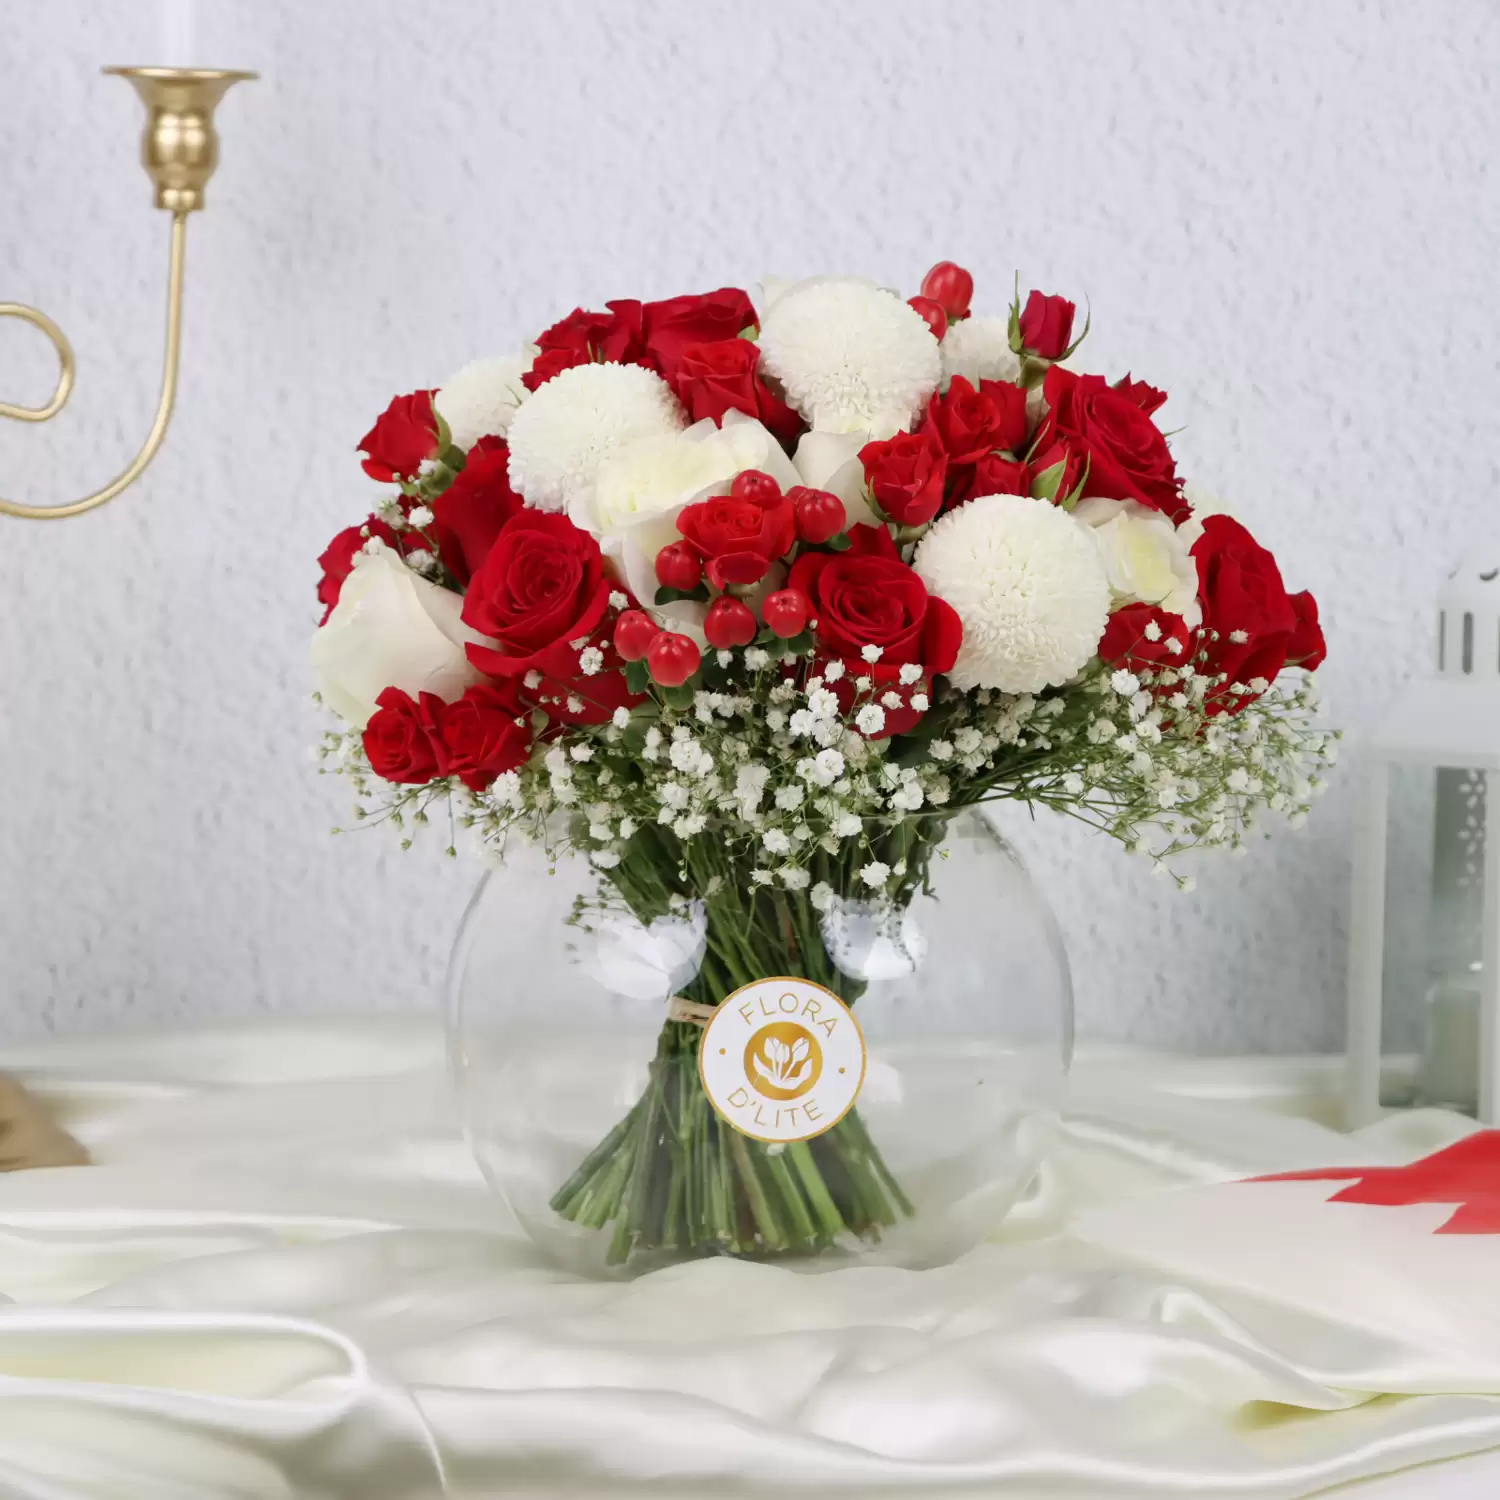 National Day Gift | Fresh Flowers Online Delivery In Bahrain - Flora D'lite